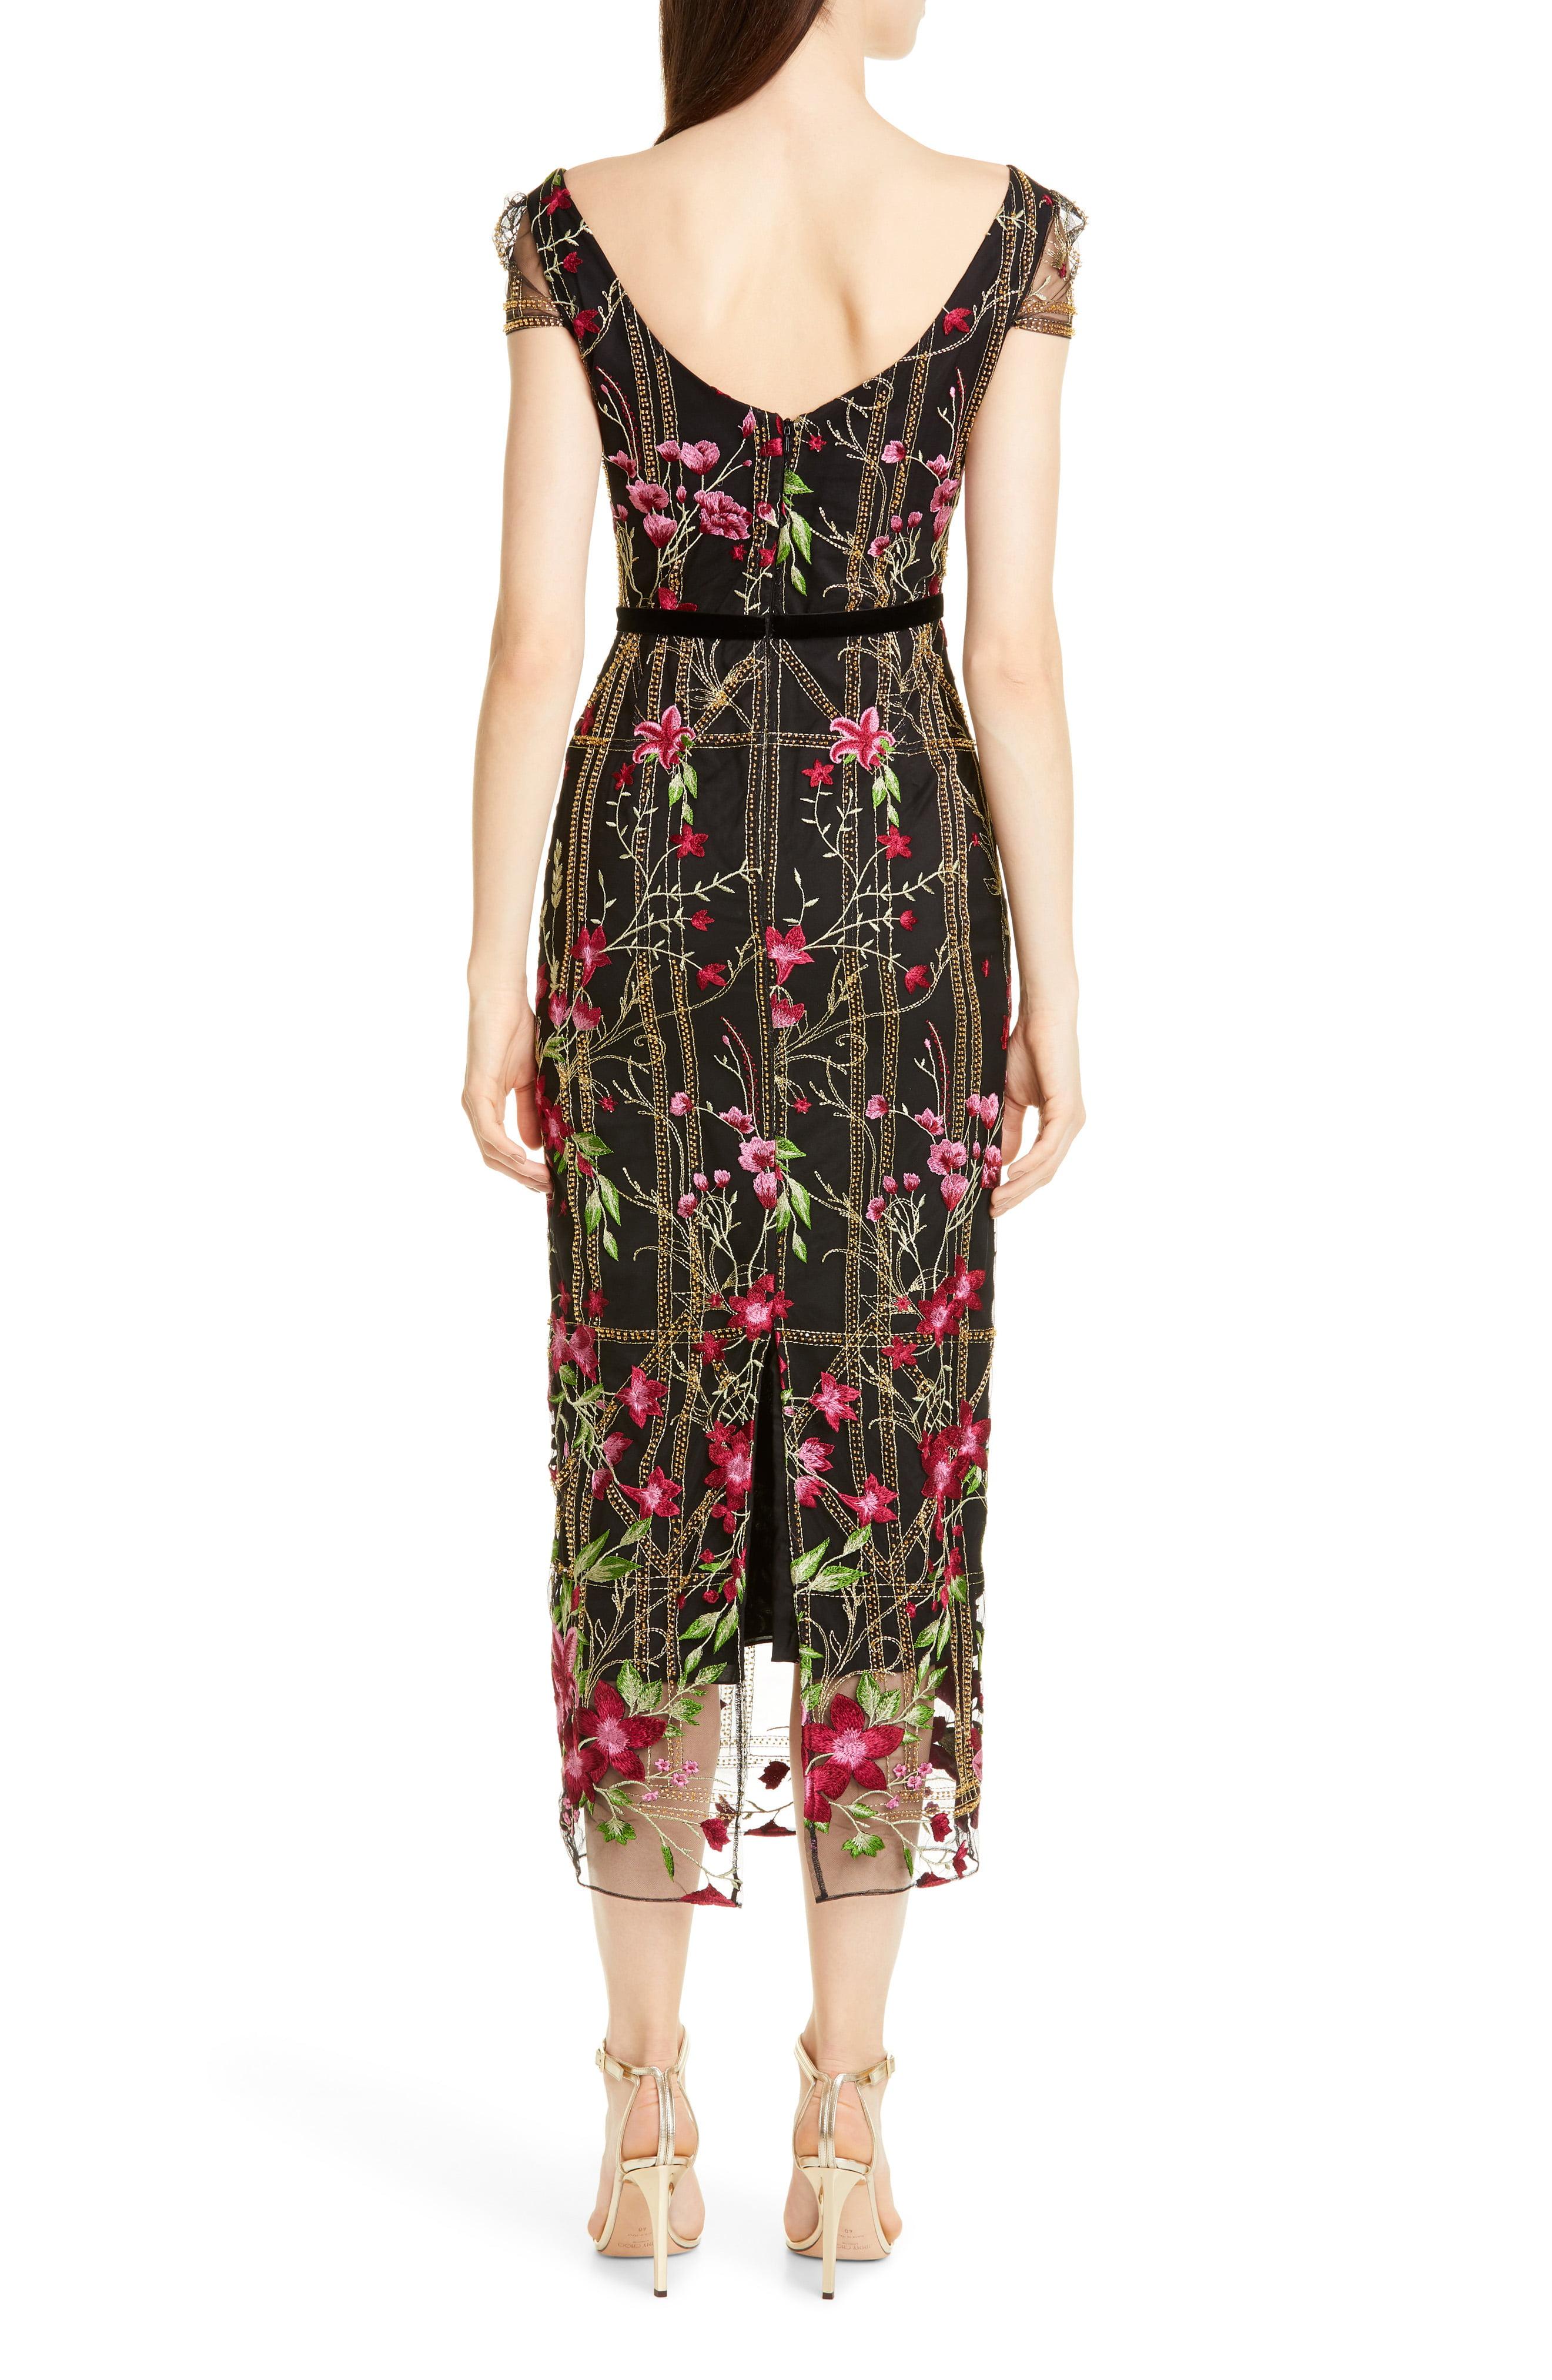 Marchesa notte Floral Embroidered Midi Dress in Black - Lyst